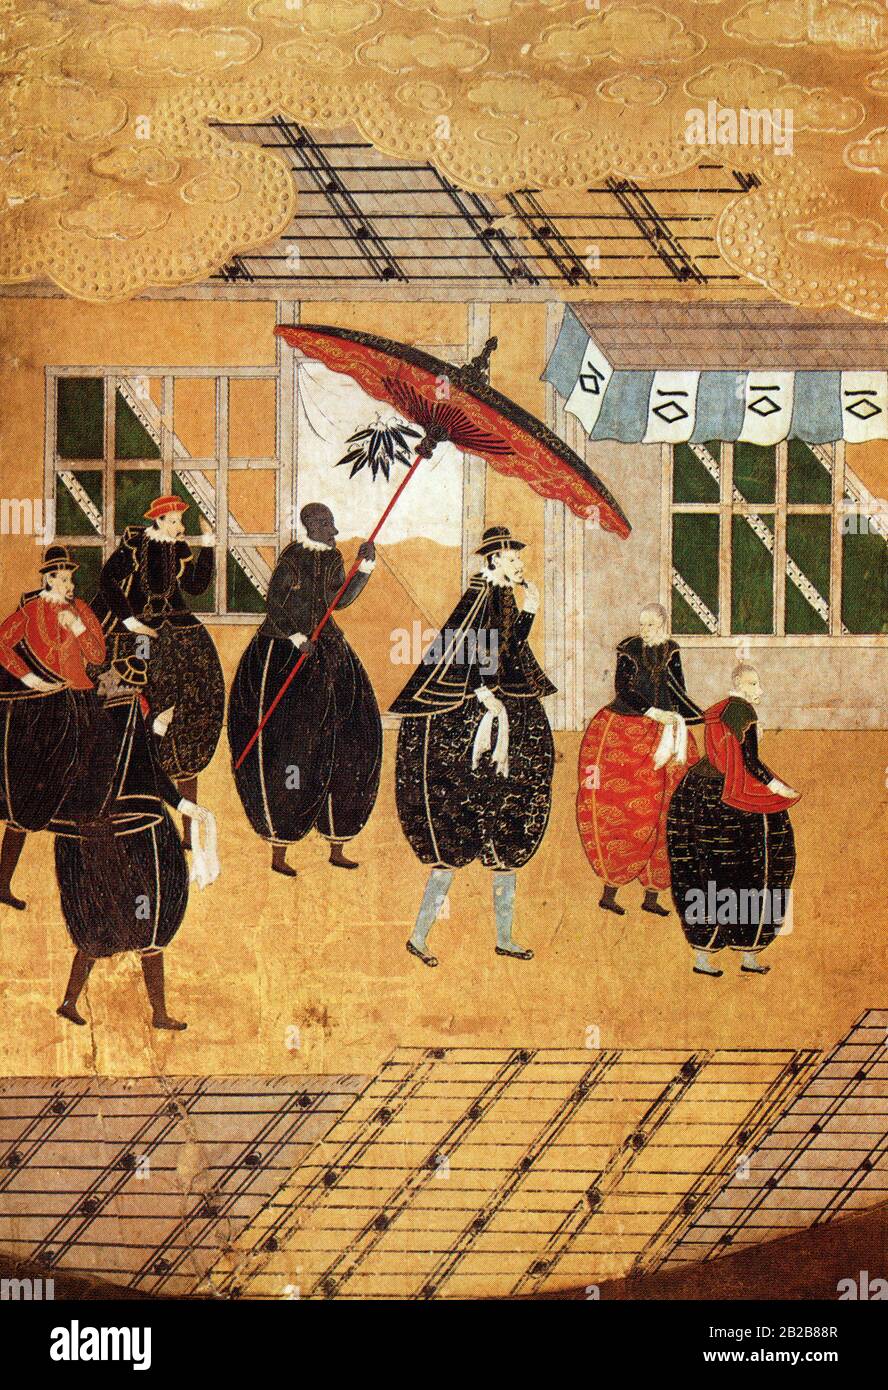 Representation of Portuguese merchants in Japan from the 17th century. Stock Photo